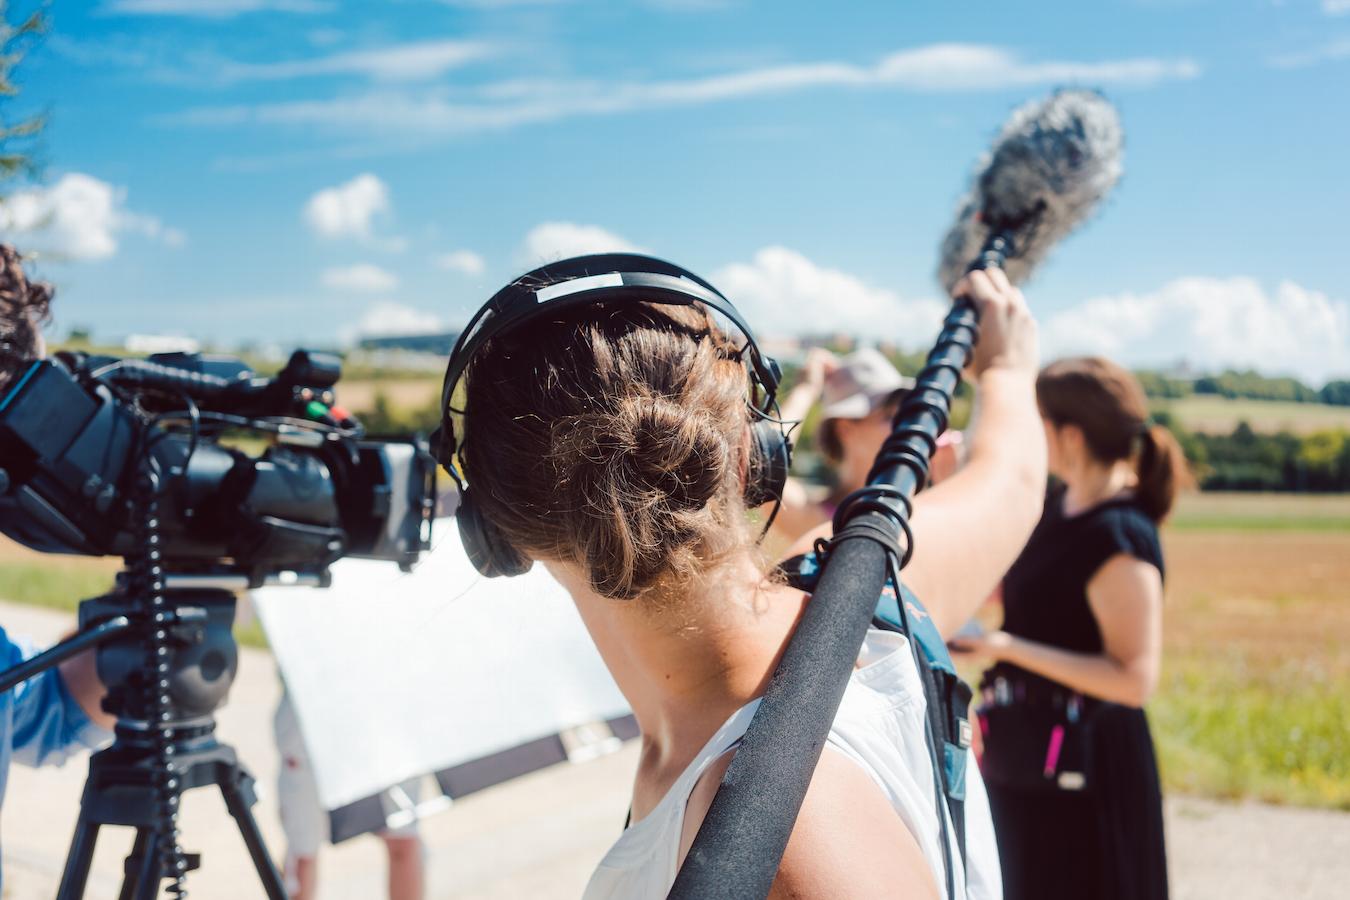 Filmmaking – Make Your Movie Sound Like A Real Movie